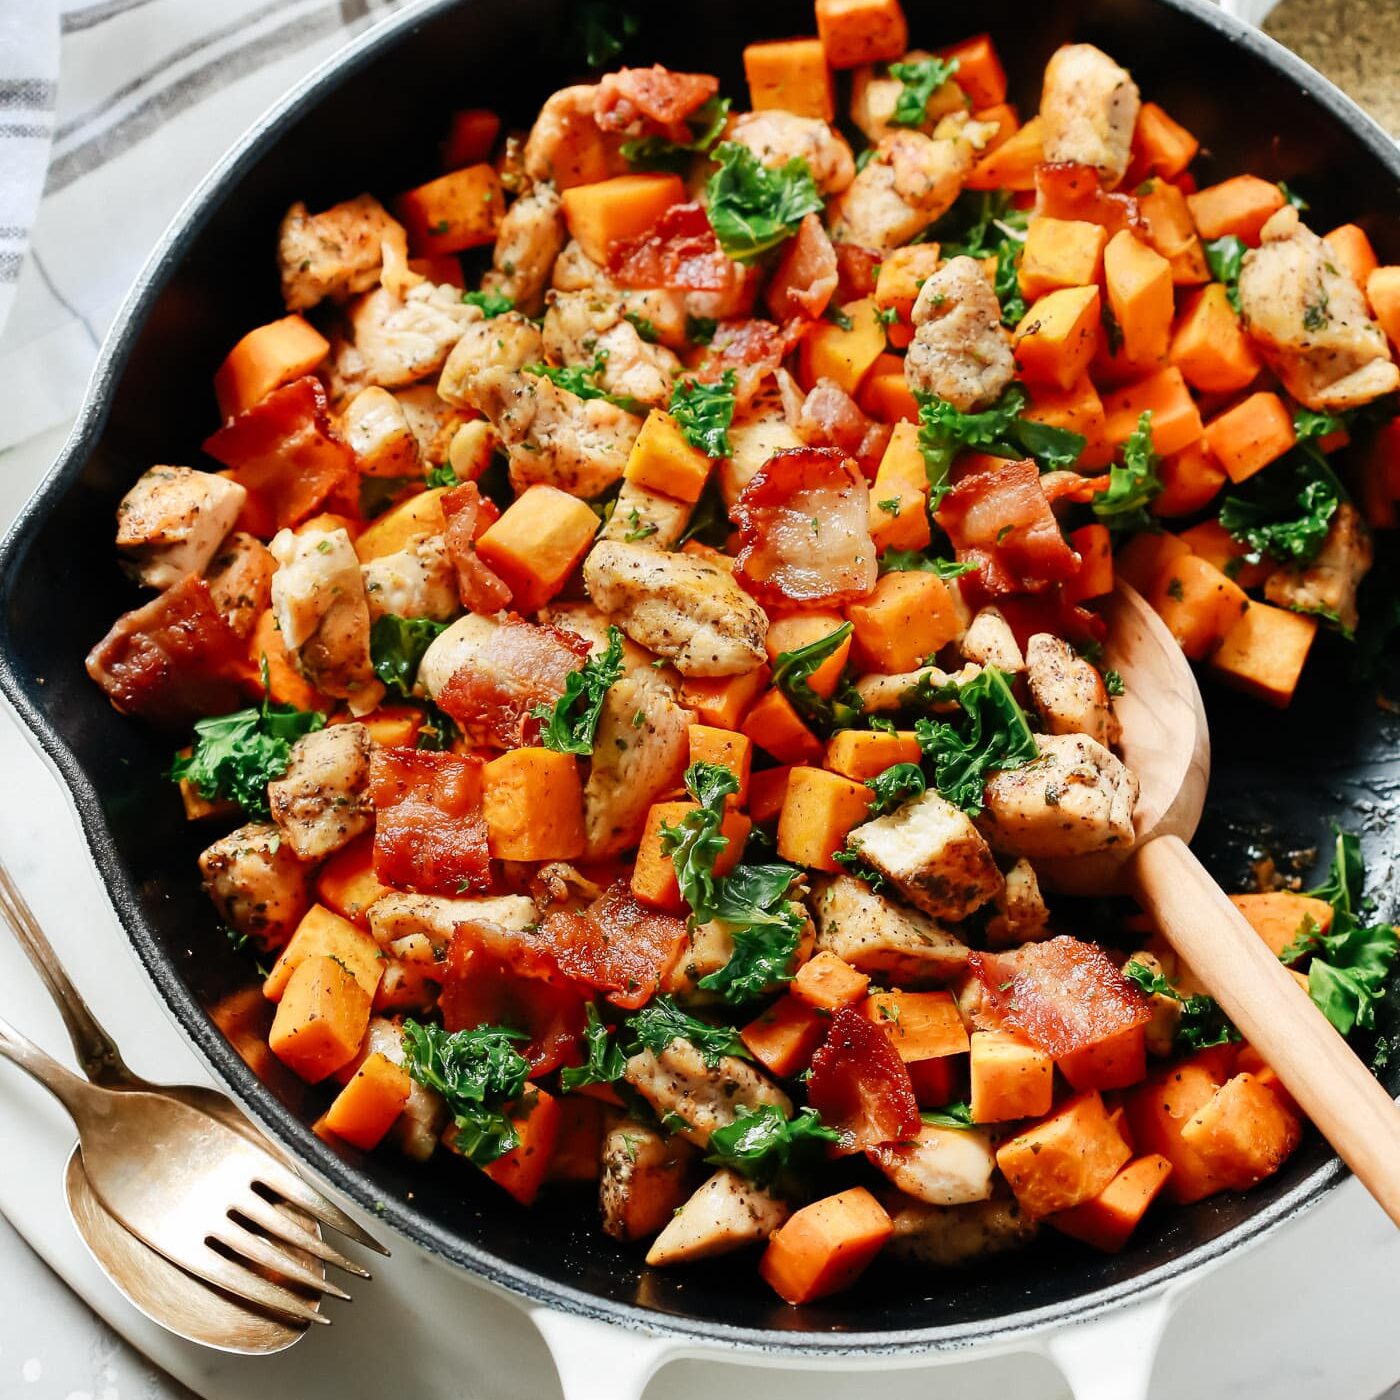 Overhead view of a white skillet containing kale, chicken and sweet potato. One of my favorite date night dinner ideas.